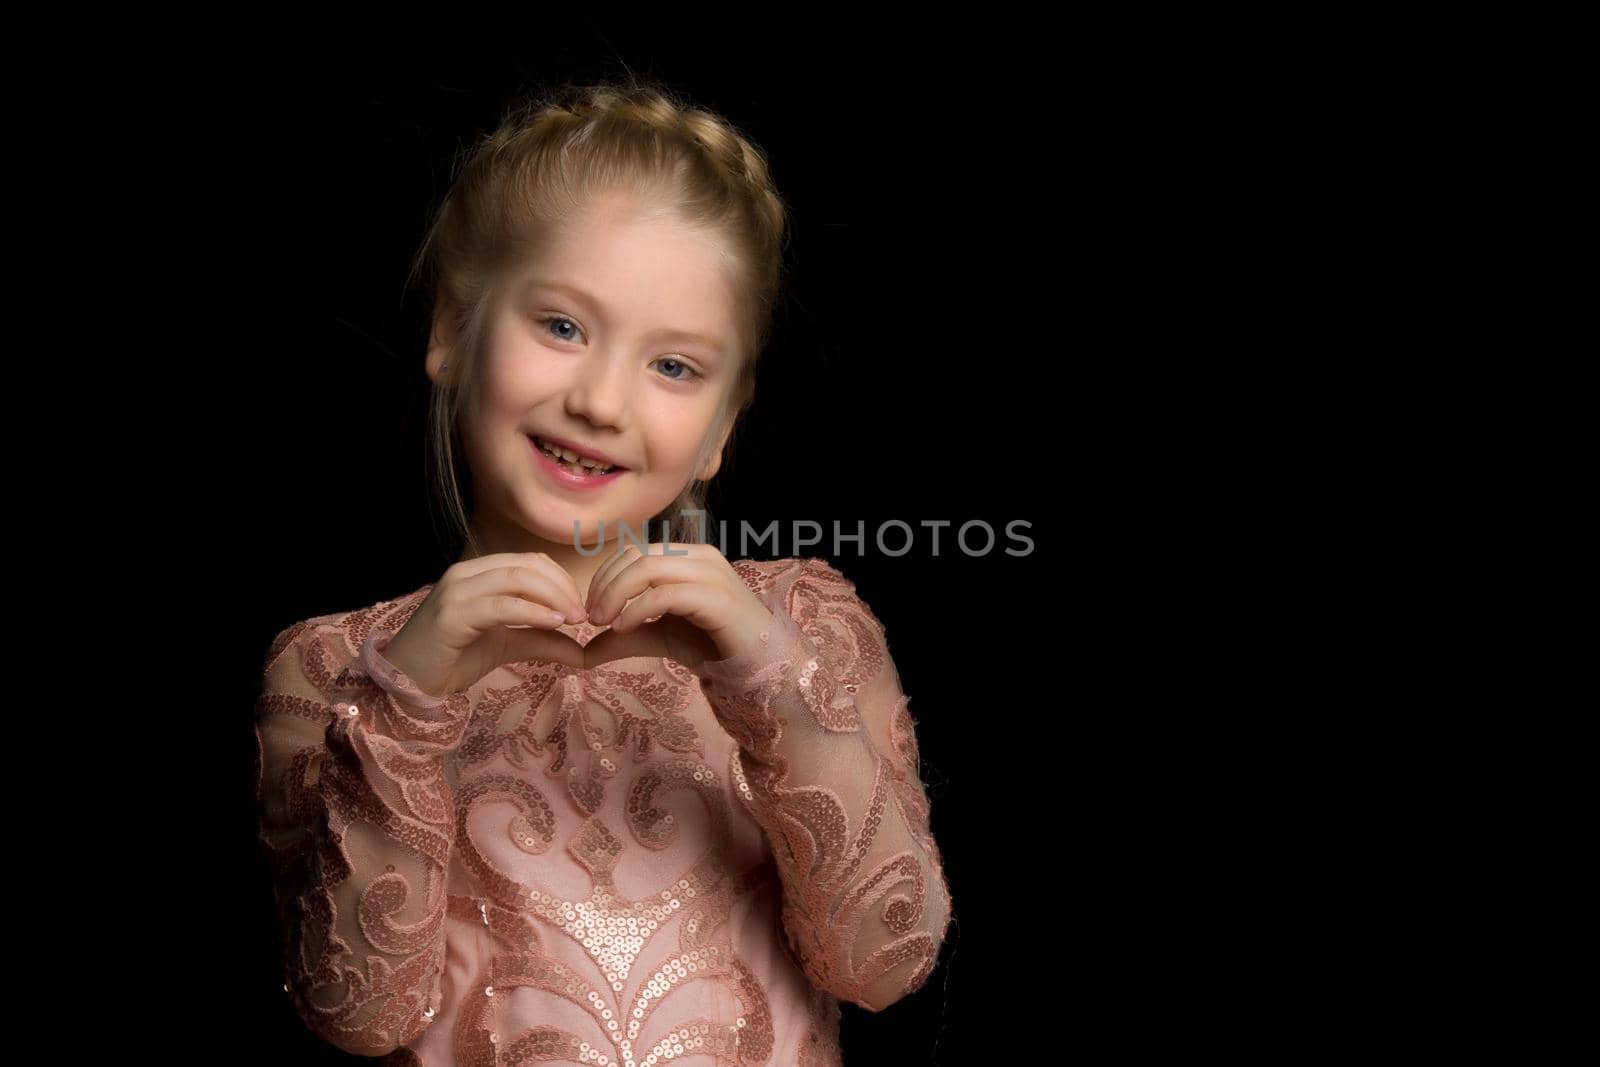 Cute little girl makes a heart with her hands and smiles on a black background.